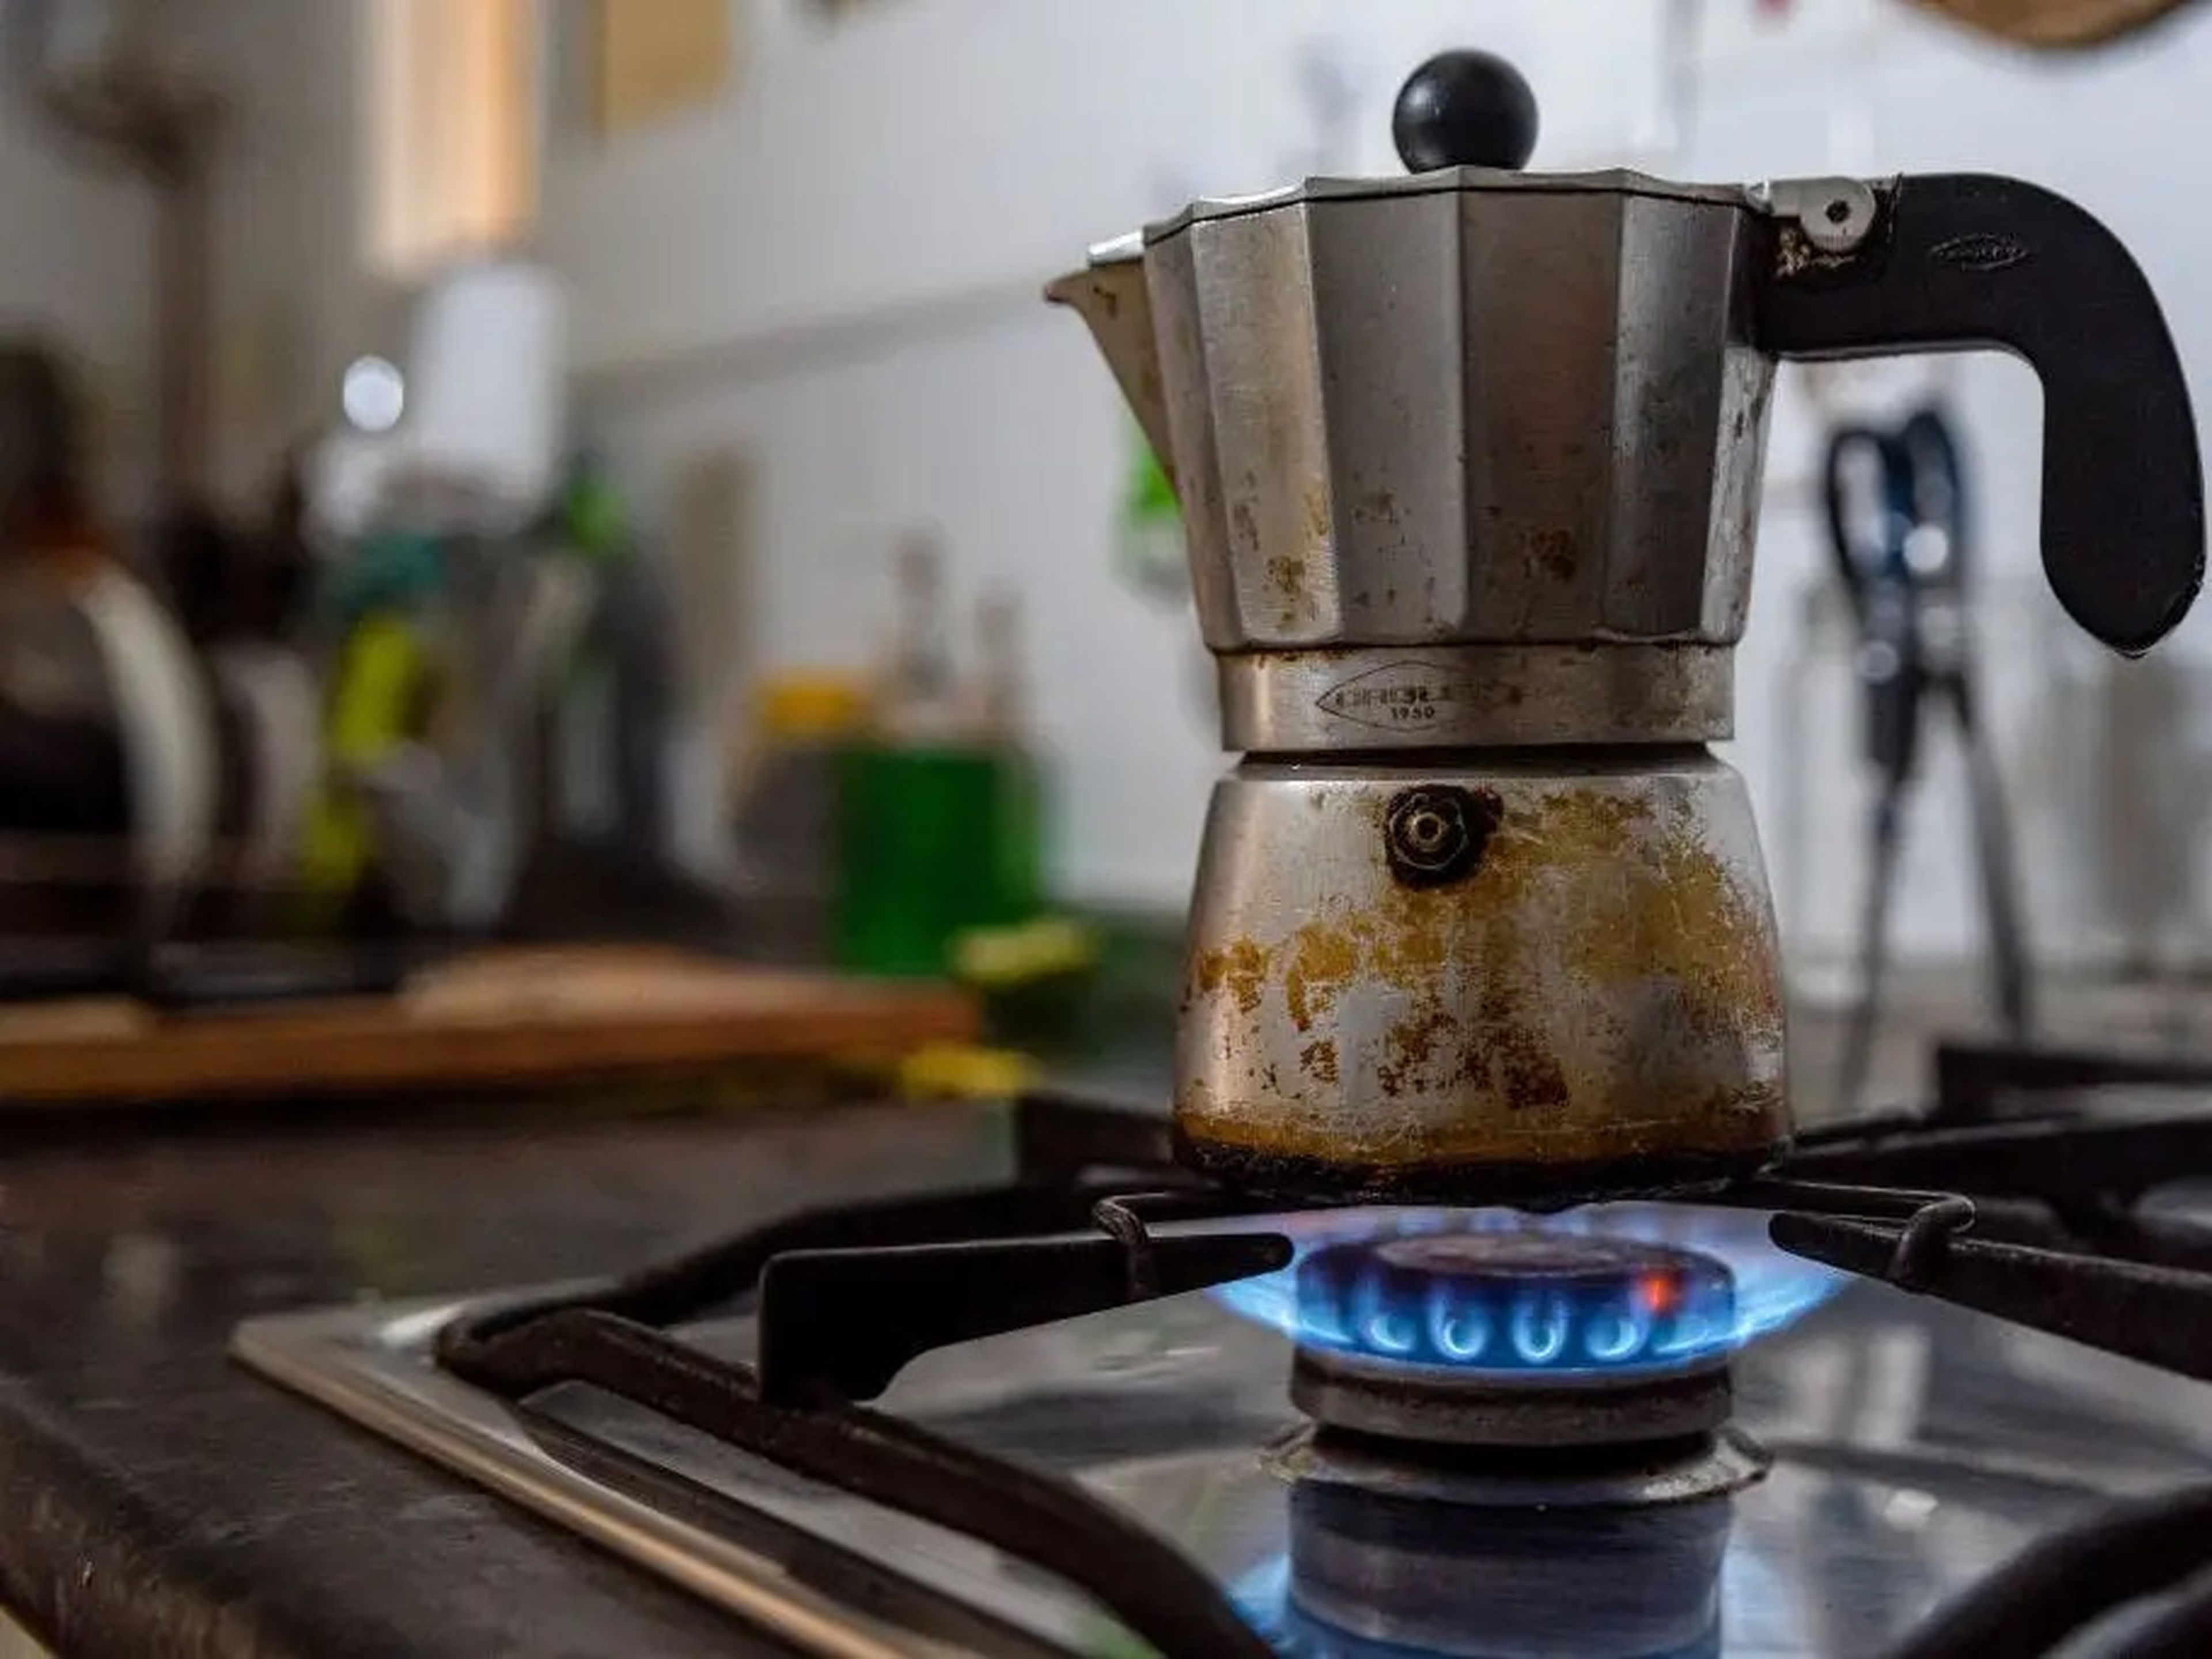 A coffee pot is seen over a blue flame gas stove inside a kitchen